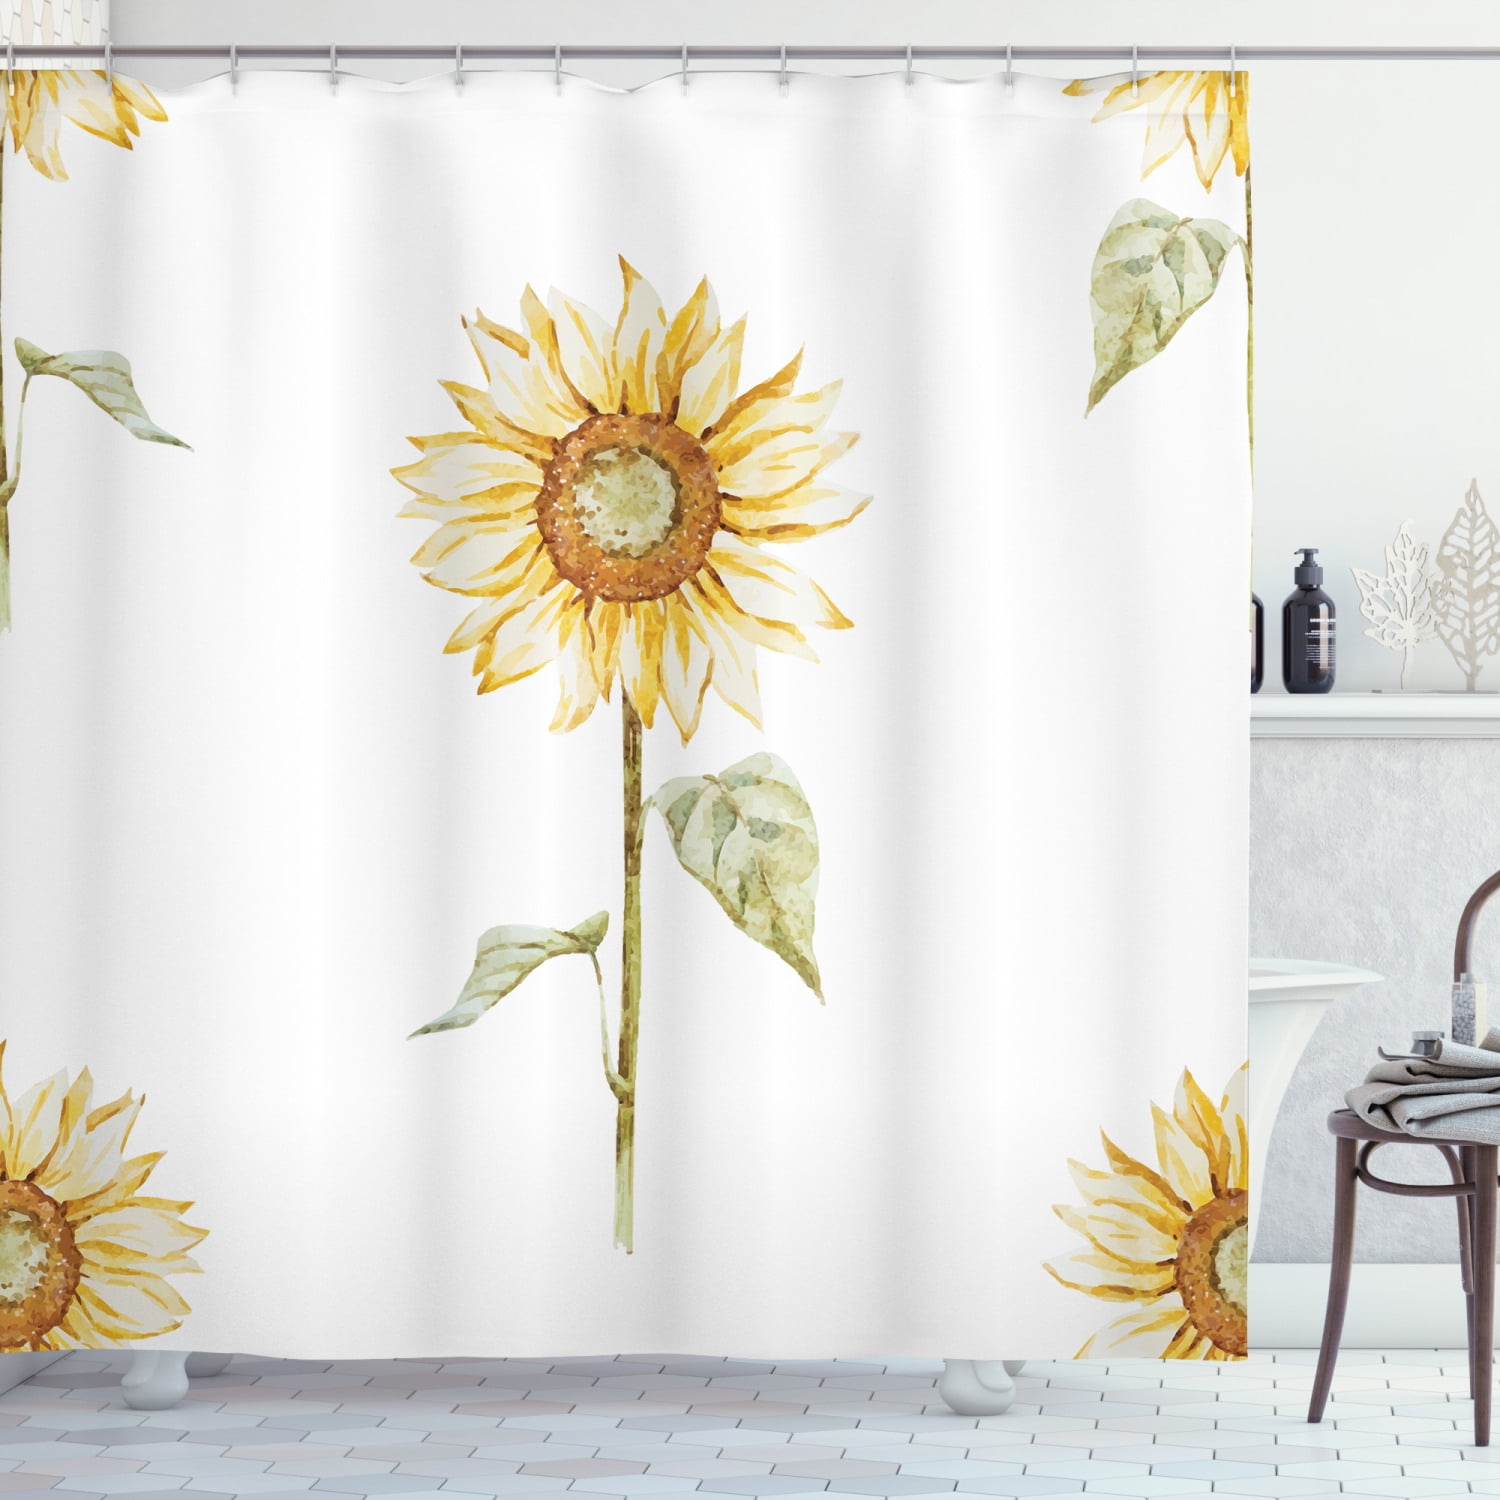 Black Girl Shower Curtain Sets African Women with Sunflowers for Bathroom Decor 